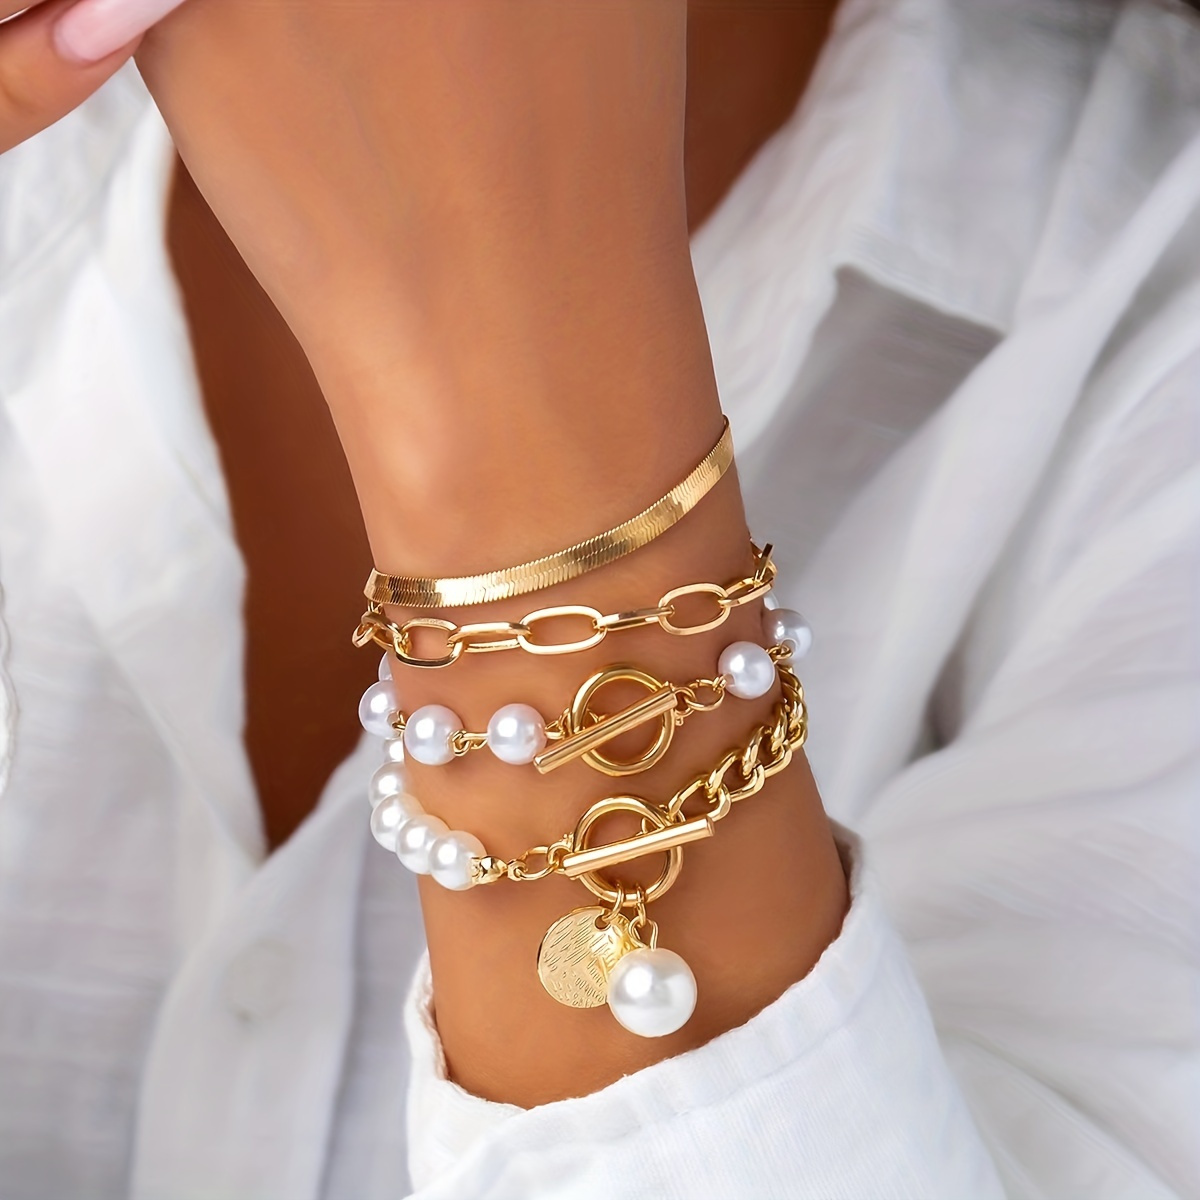 

4pcs Golden Chain Beaded Bracelet Set Hand Decoration Jewelry, Luxury And Elegant Style, For Daily Wear